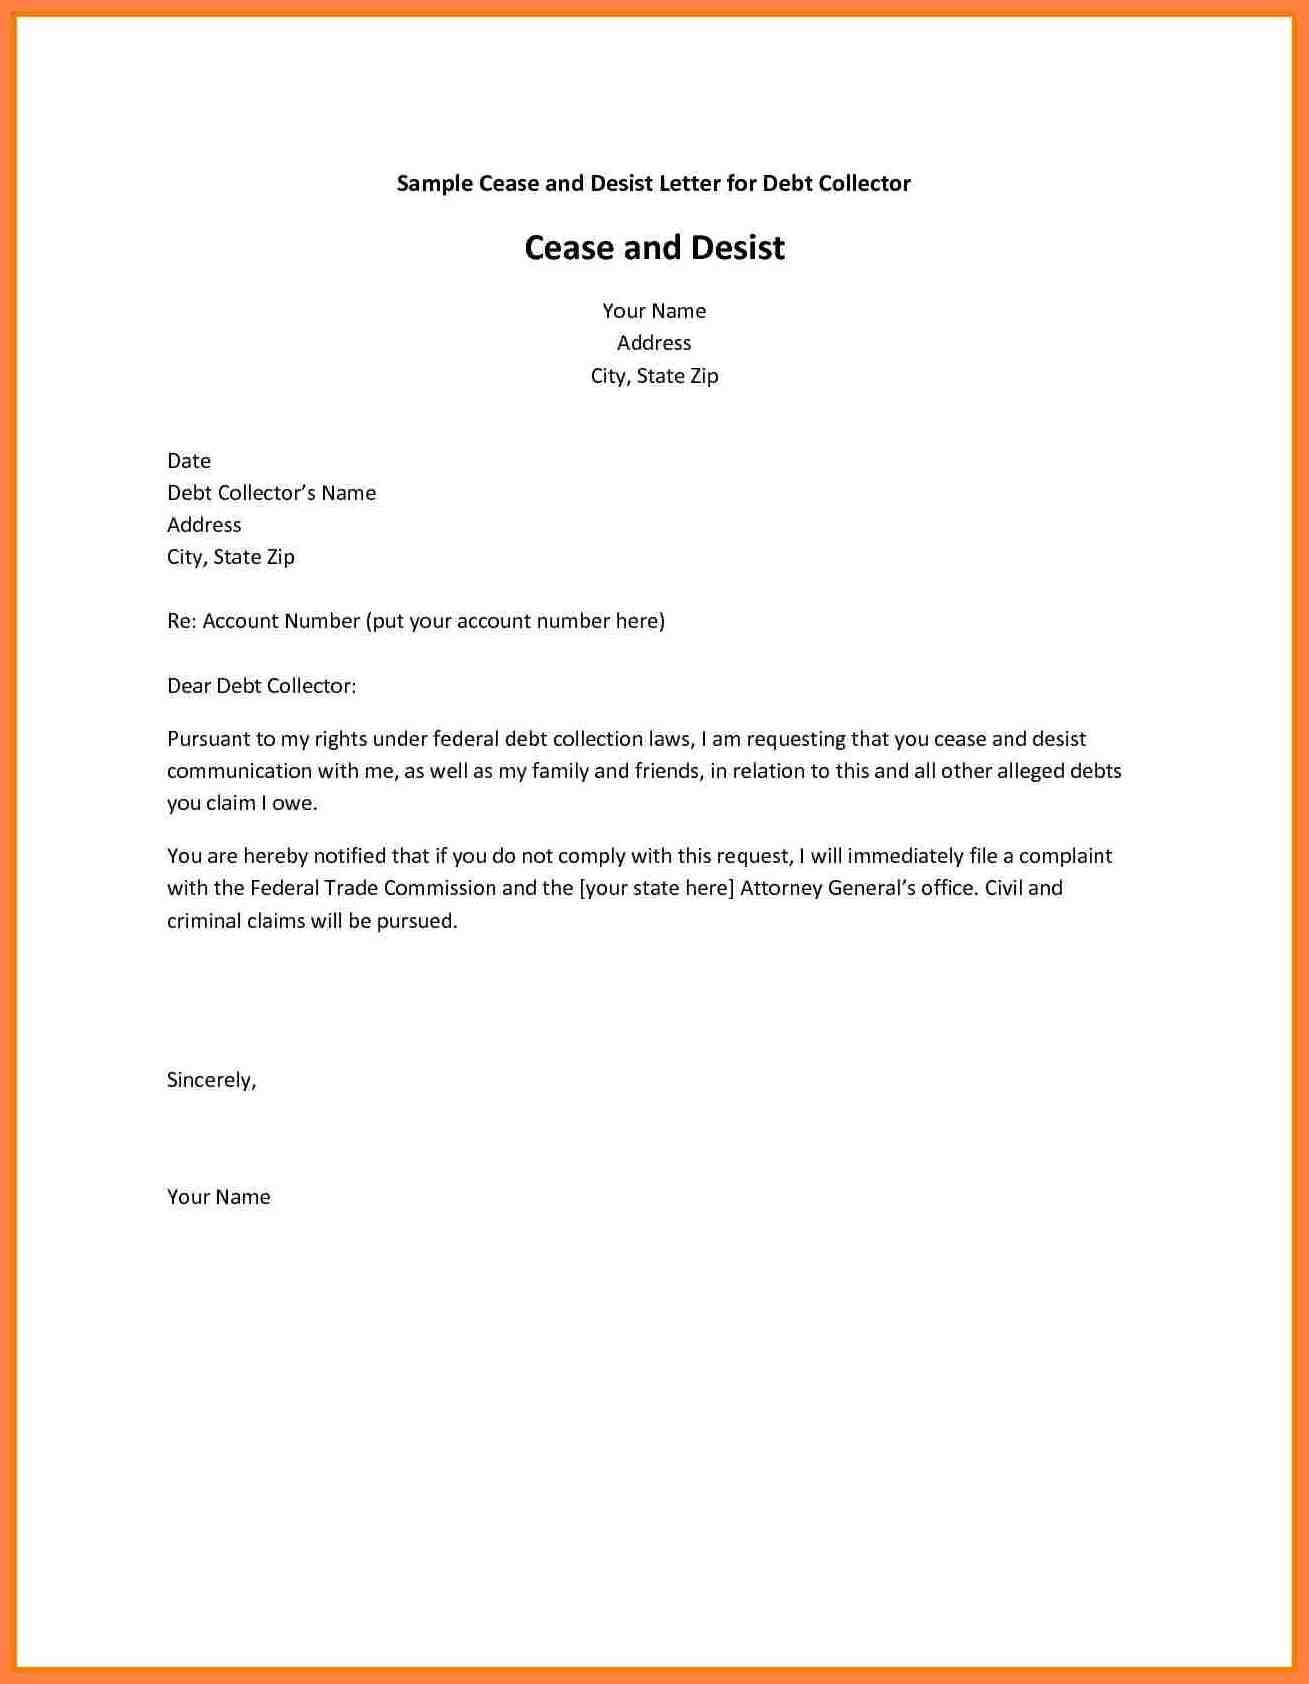 Free Cease and Desist Letter Template for Slander - Cease and Desist Letter Sample Lovely Best Debt Collection Cease and